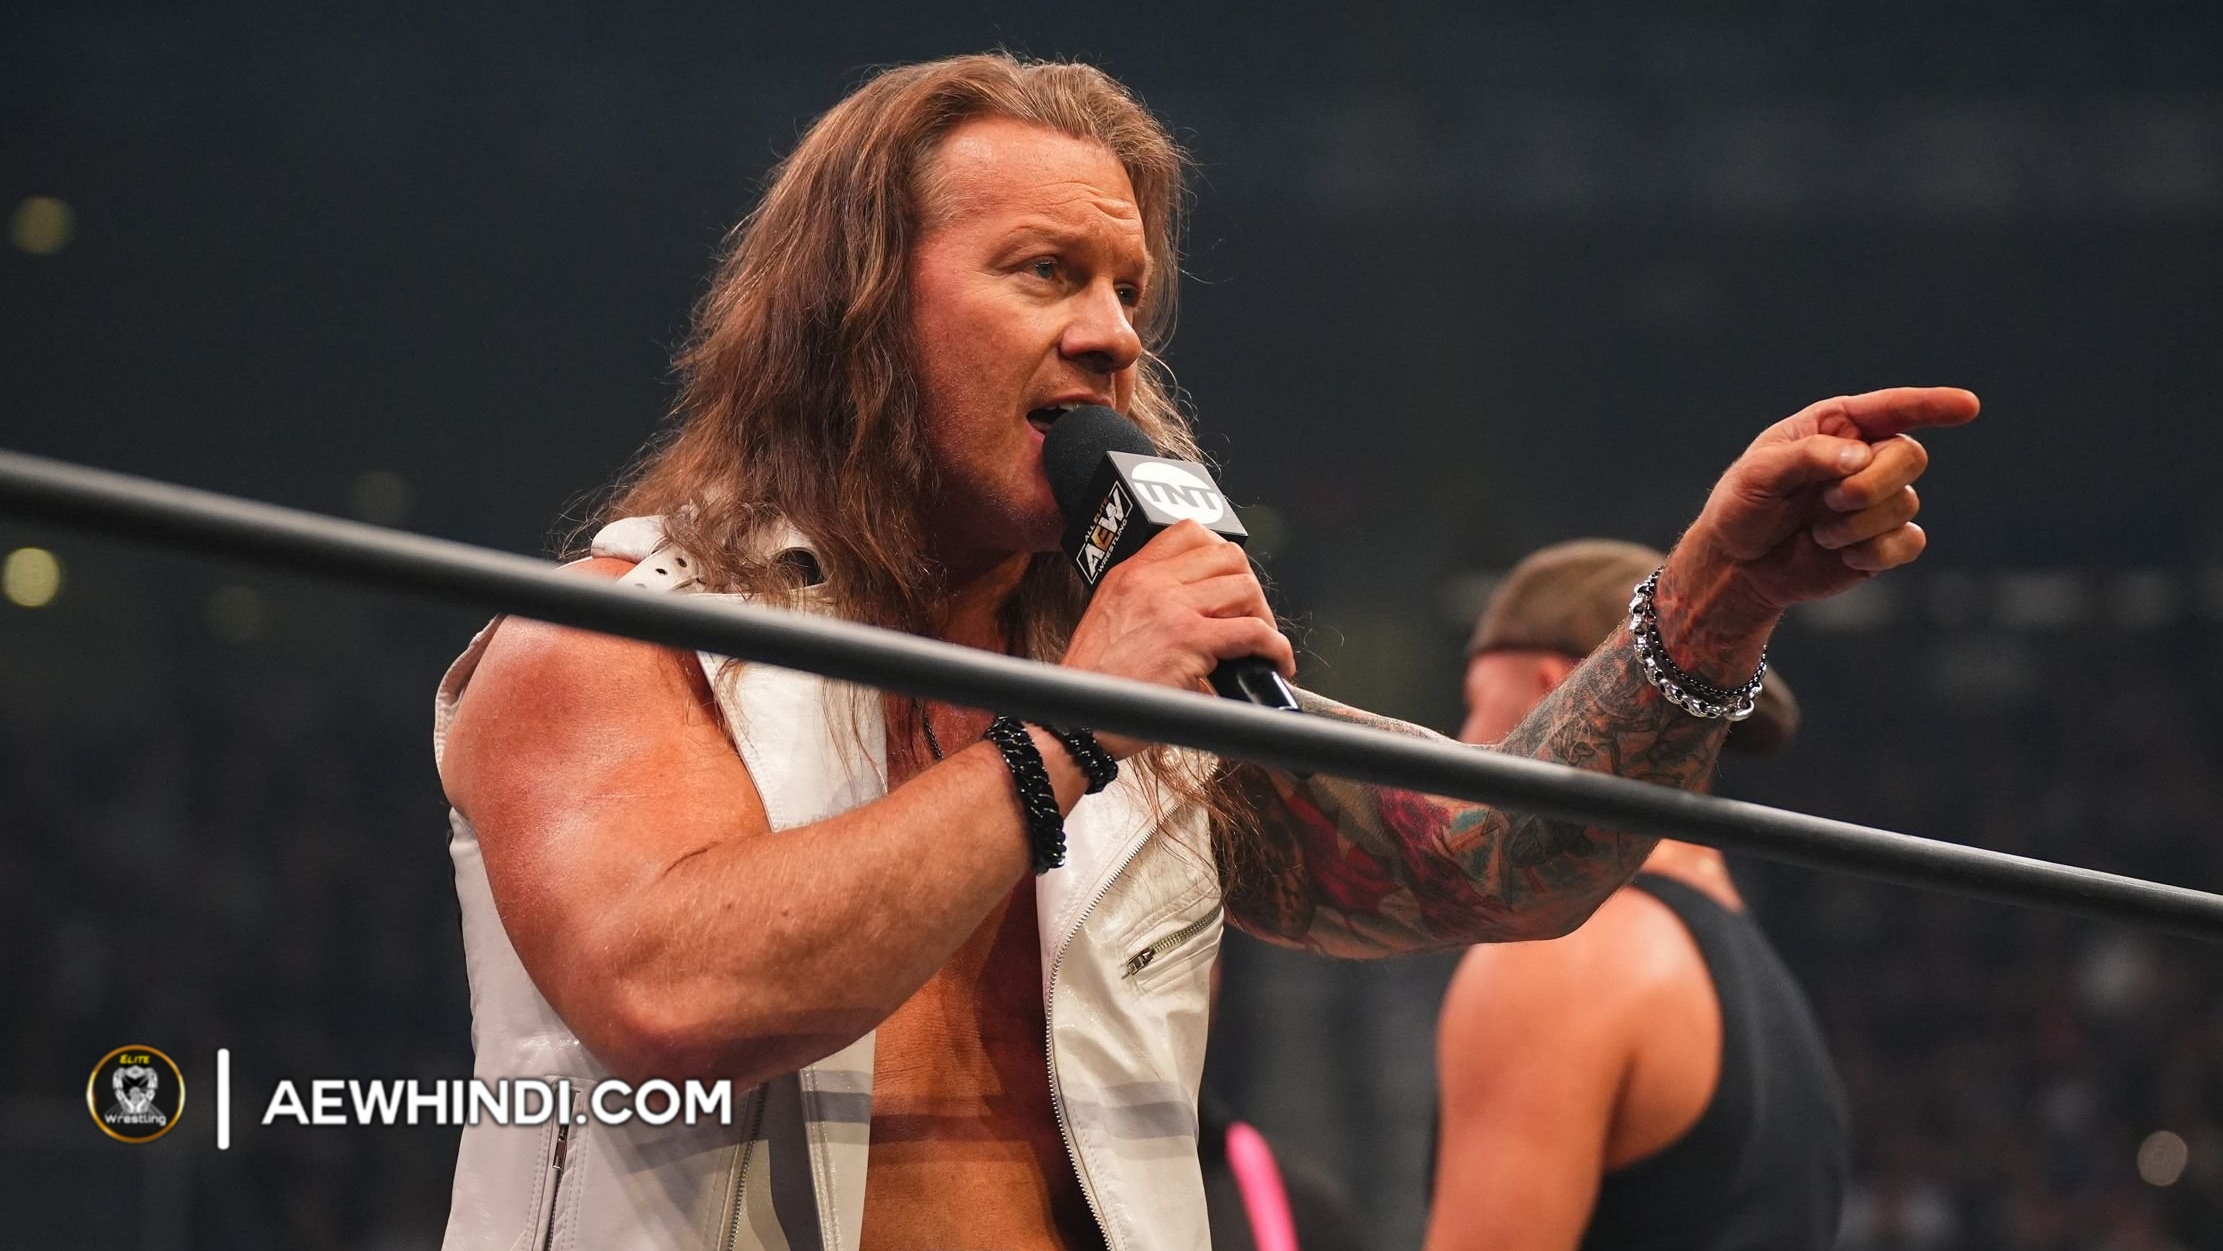 Chris Jericho comments on his AEW contract extension